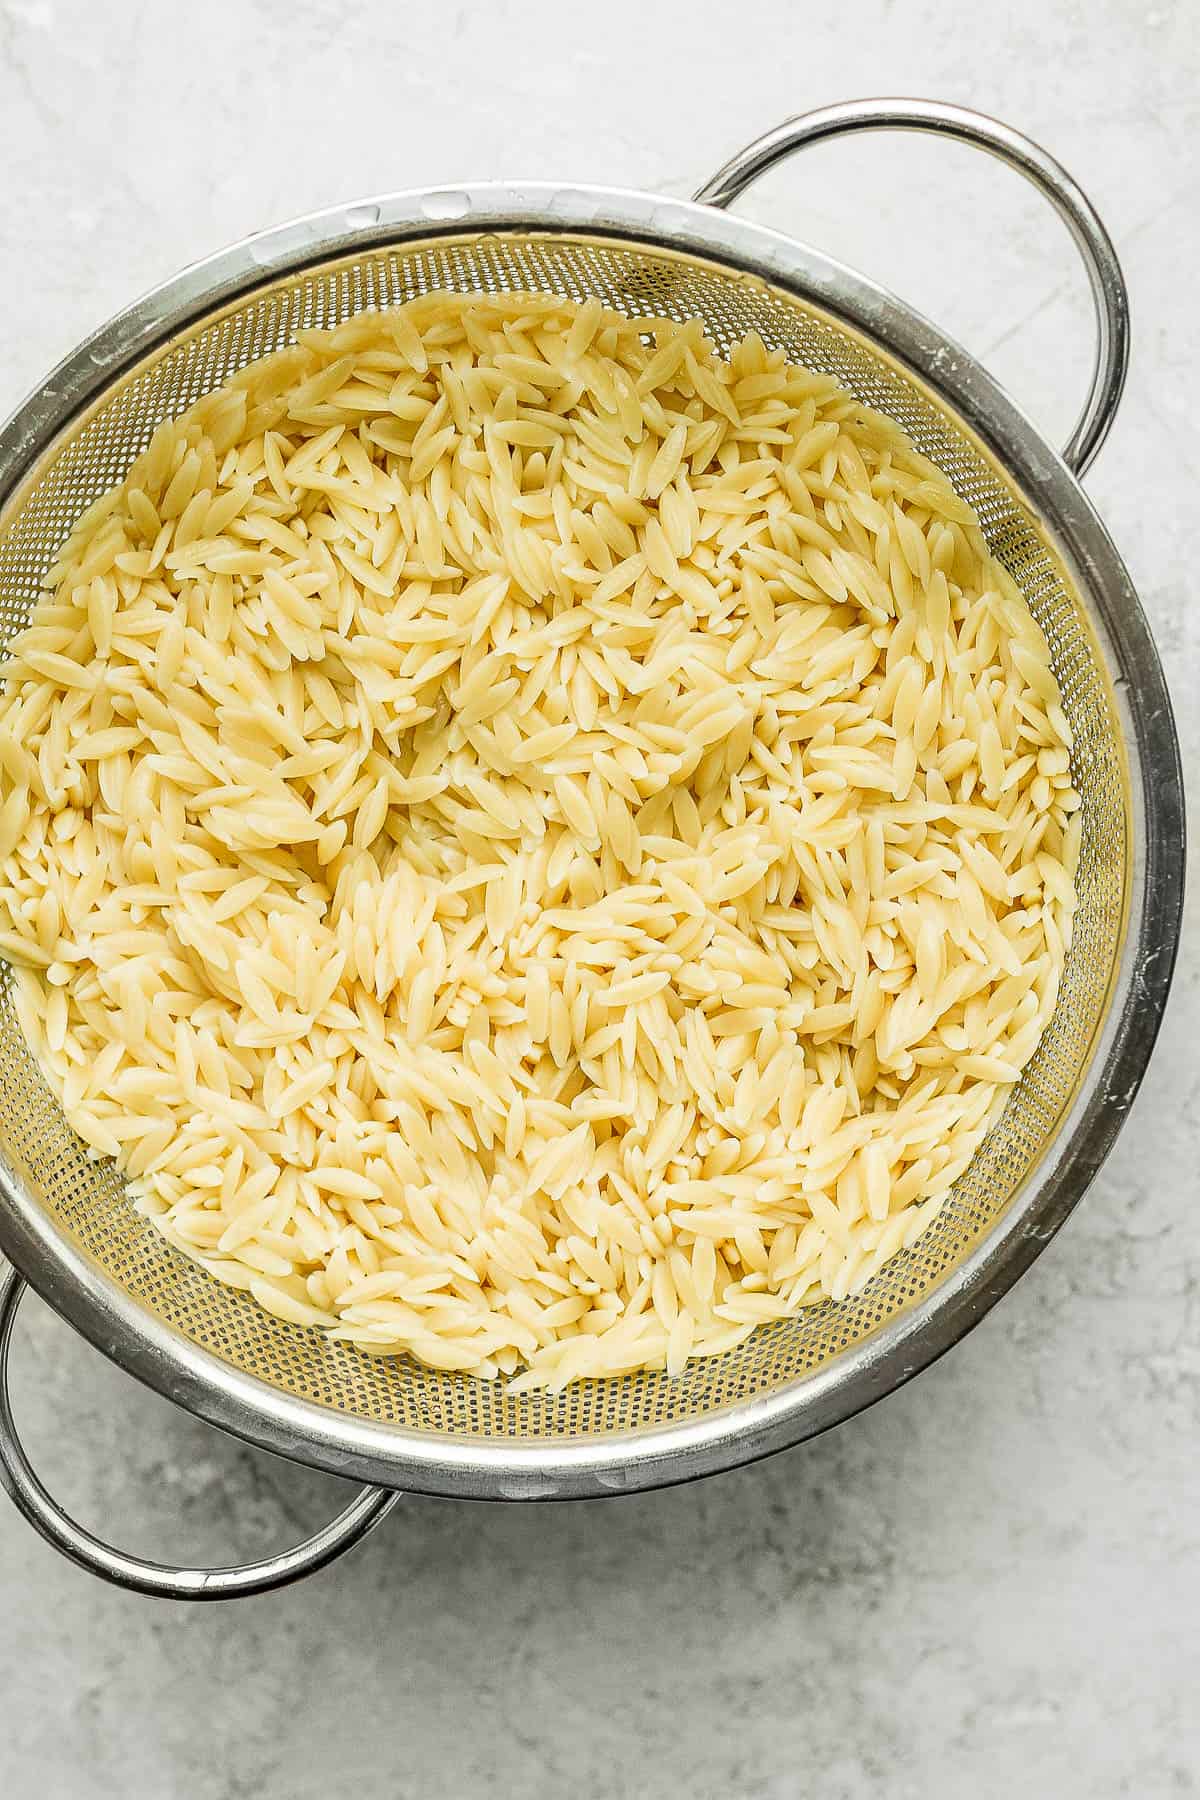 Cooked orzo that has been drained in a colander.